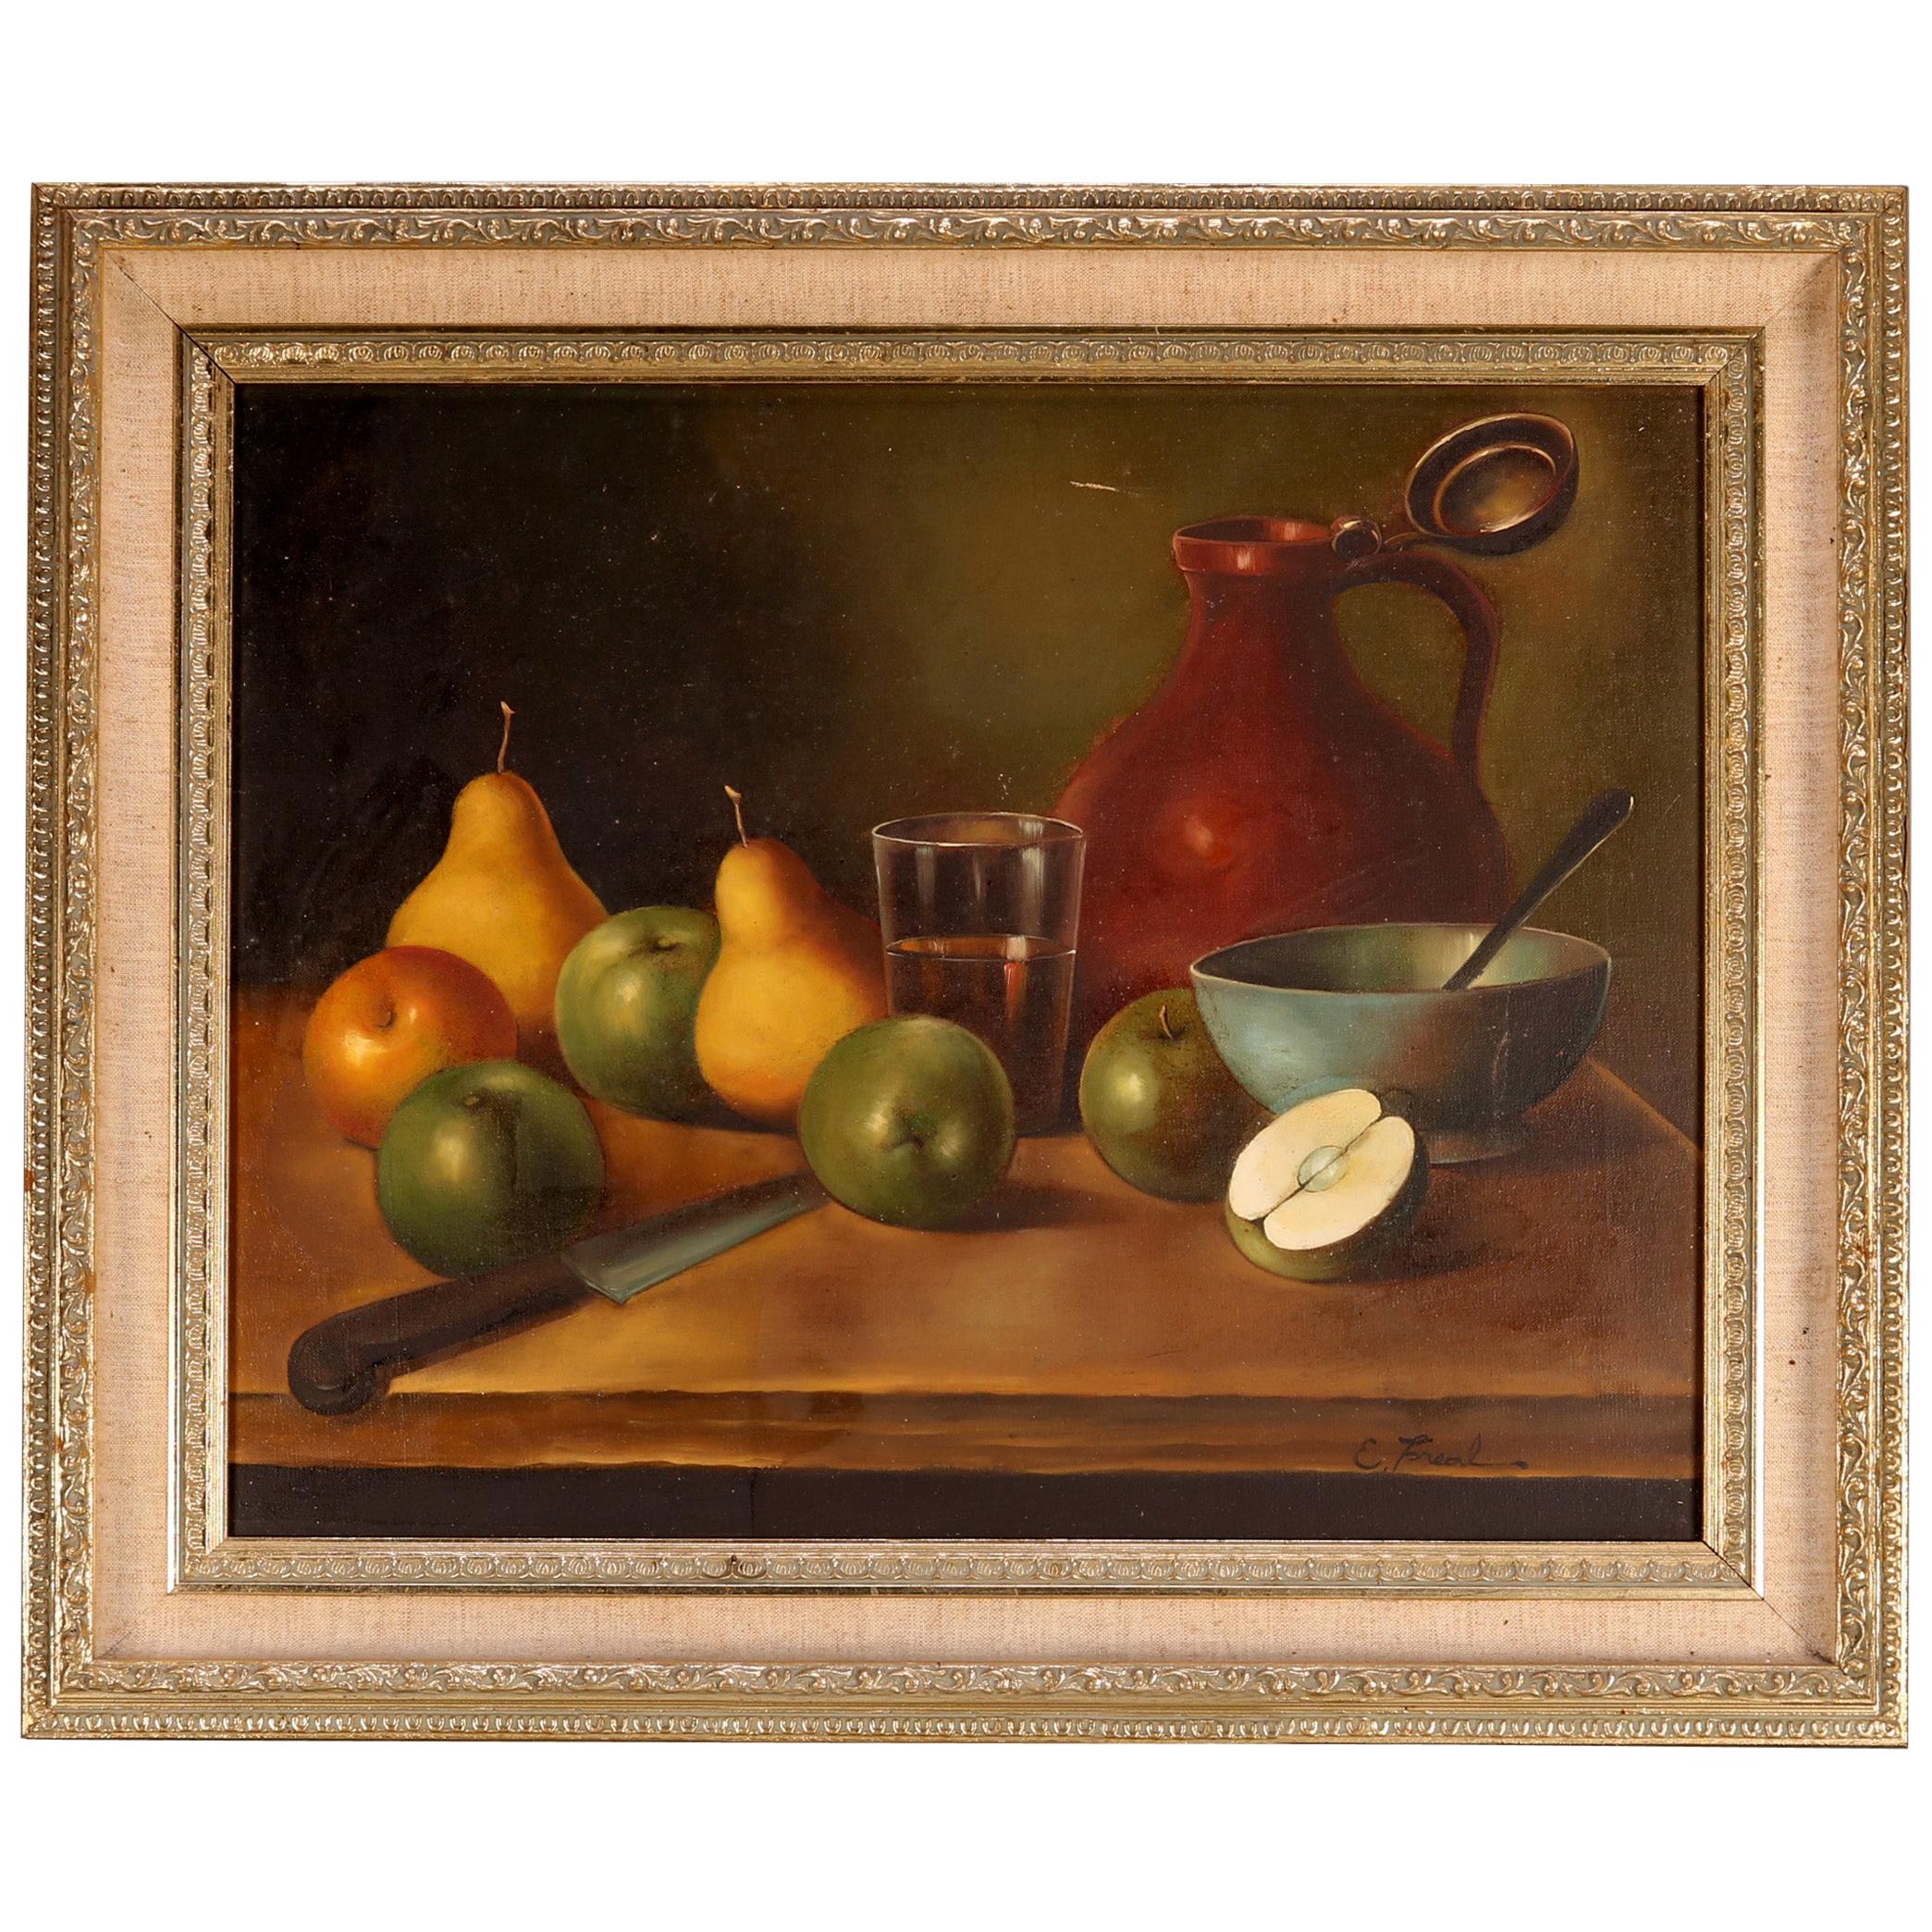 Antique Painting, Fruit Still Life Oil on Canvas, Artist Signed, circa 1920